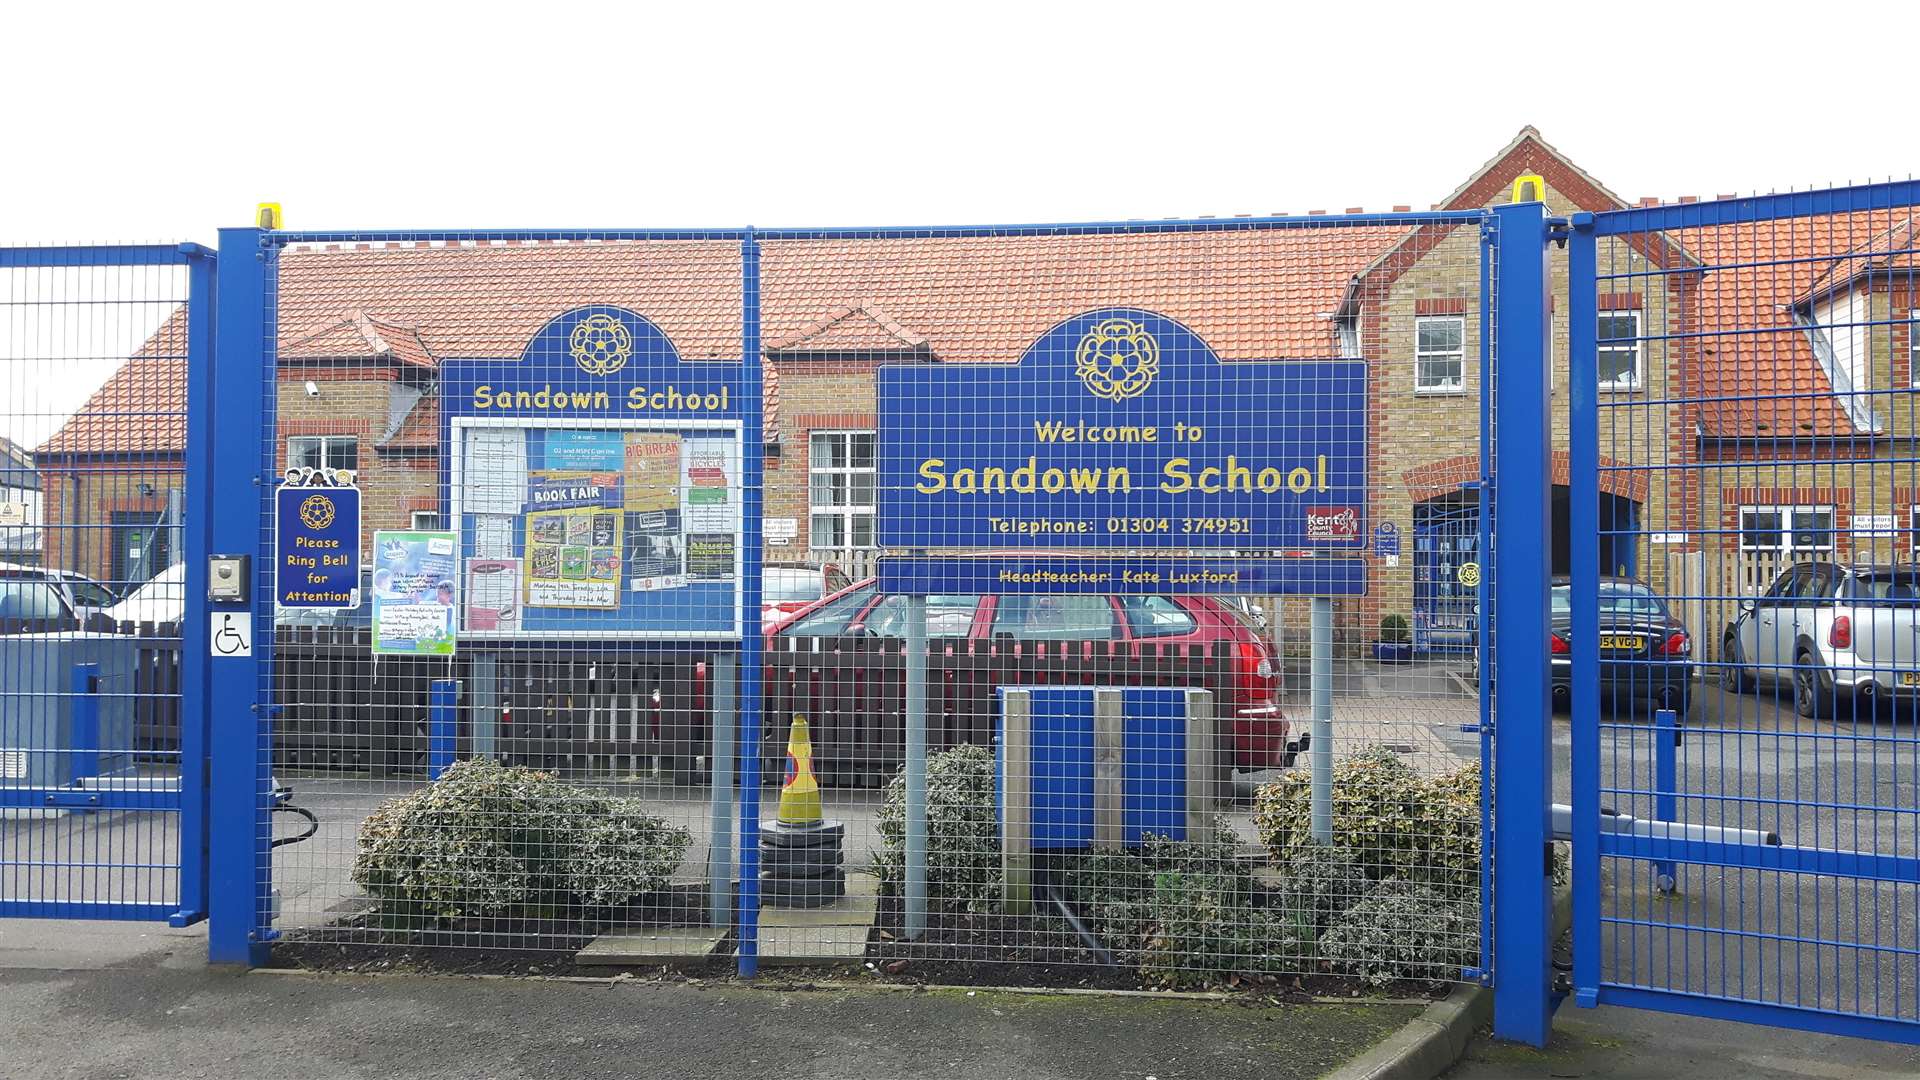 Sandown Primary School is one of the seven schools proposed to make up the MAT